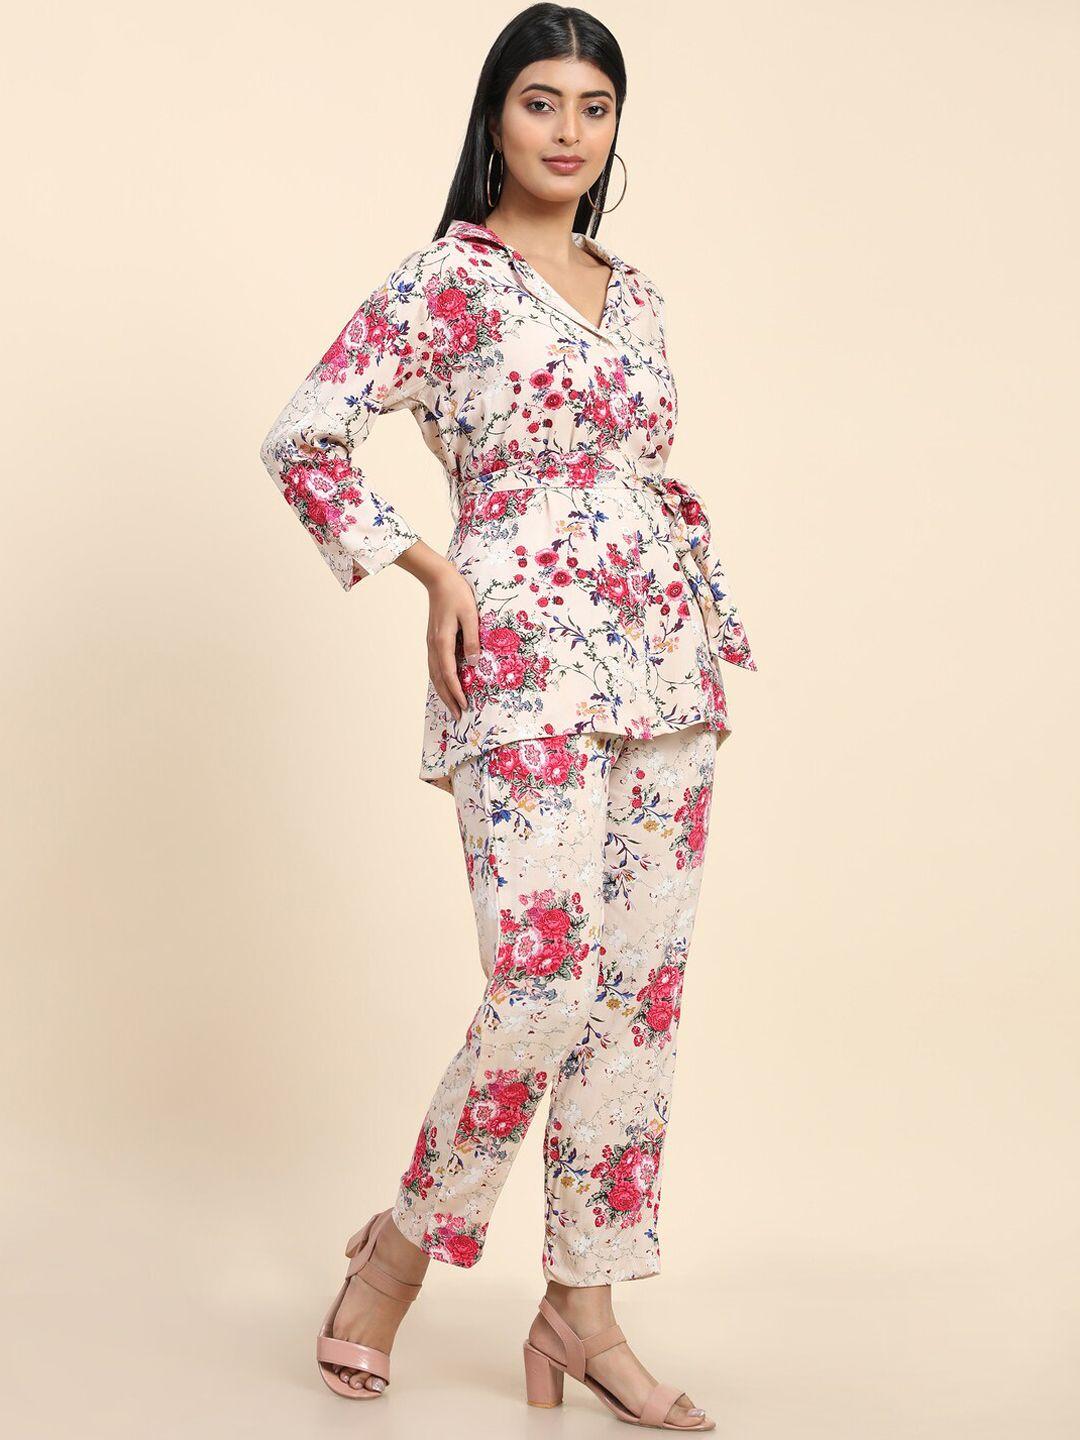 baesd floral printed lapel collar top & boot-cut wrinkle free trousers pant co-ord set